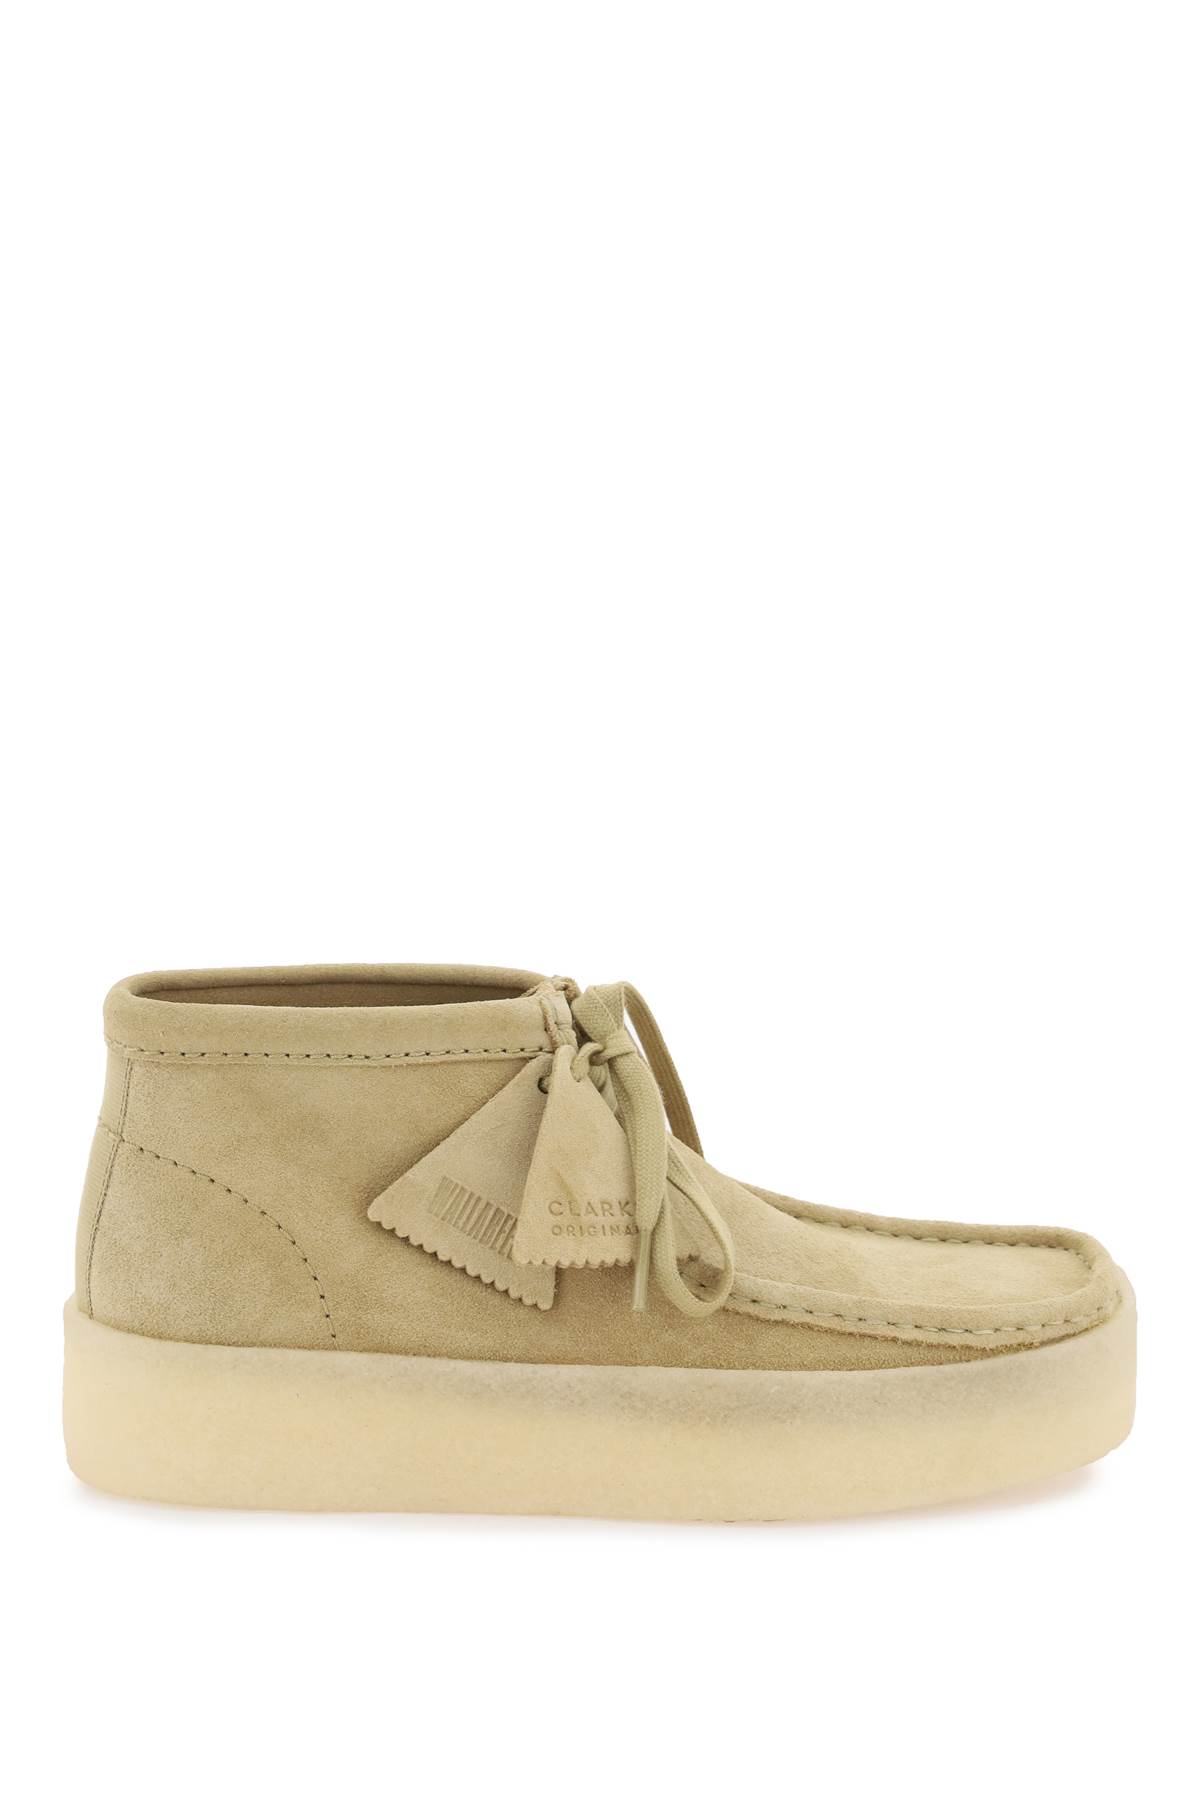 Shop Clarks Wallabee Cup Bt Lace-up Shoes In Maple (beige)